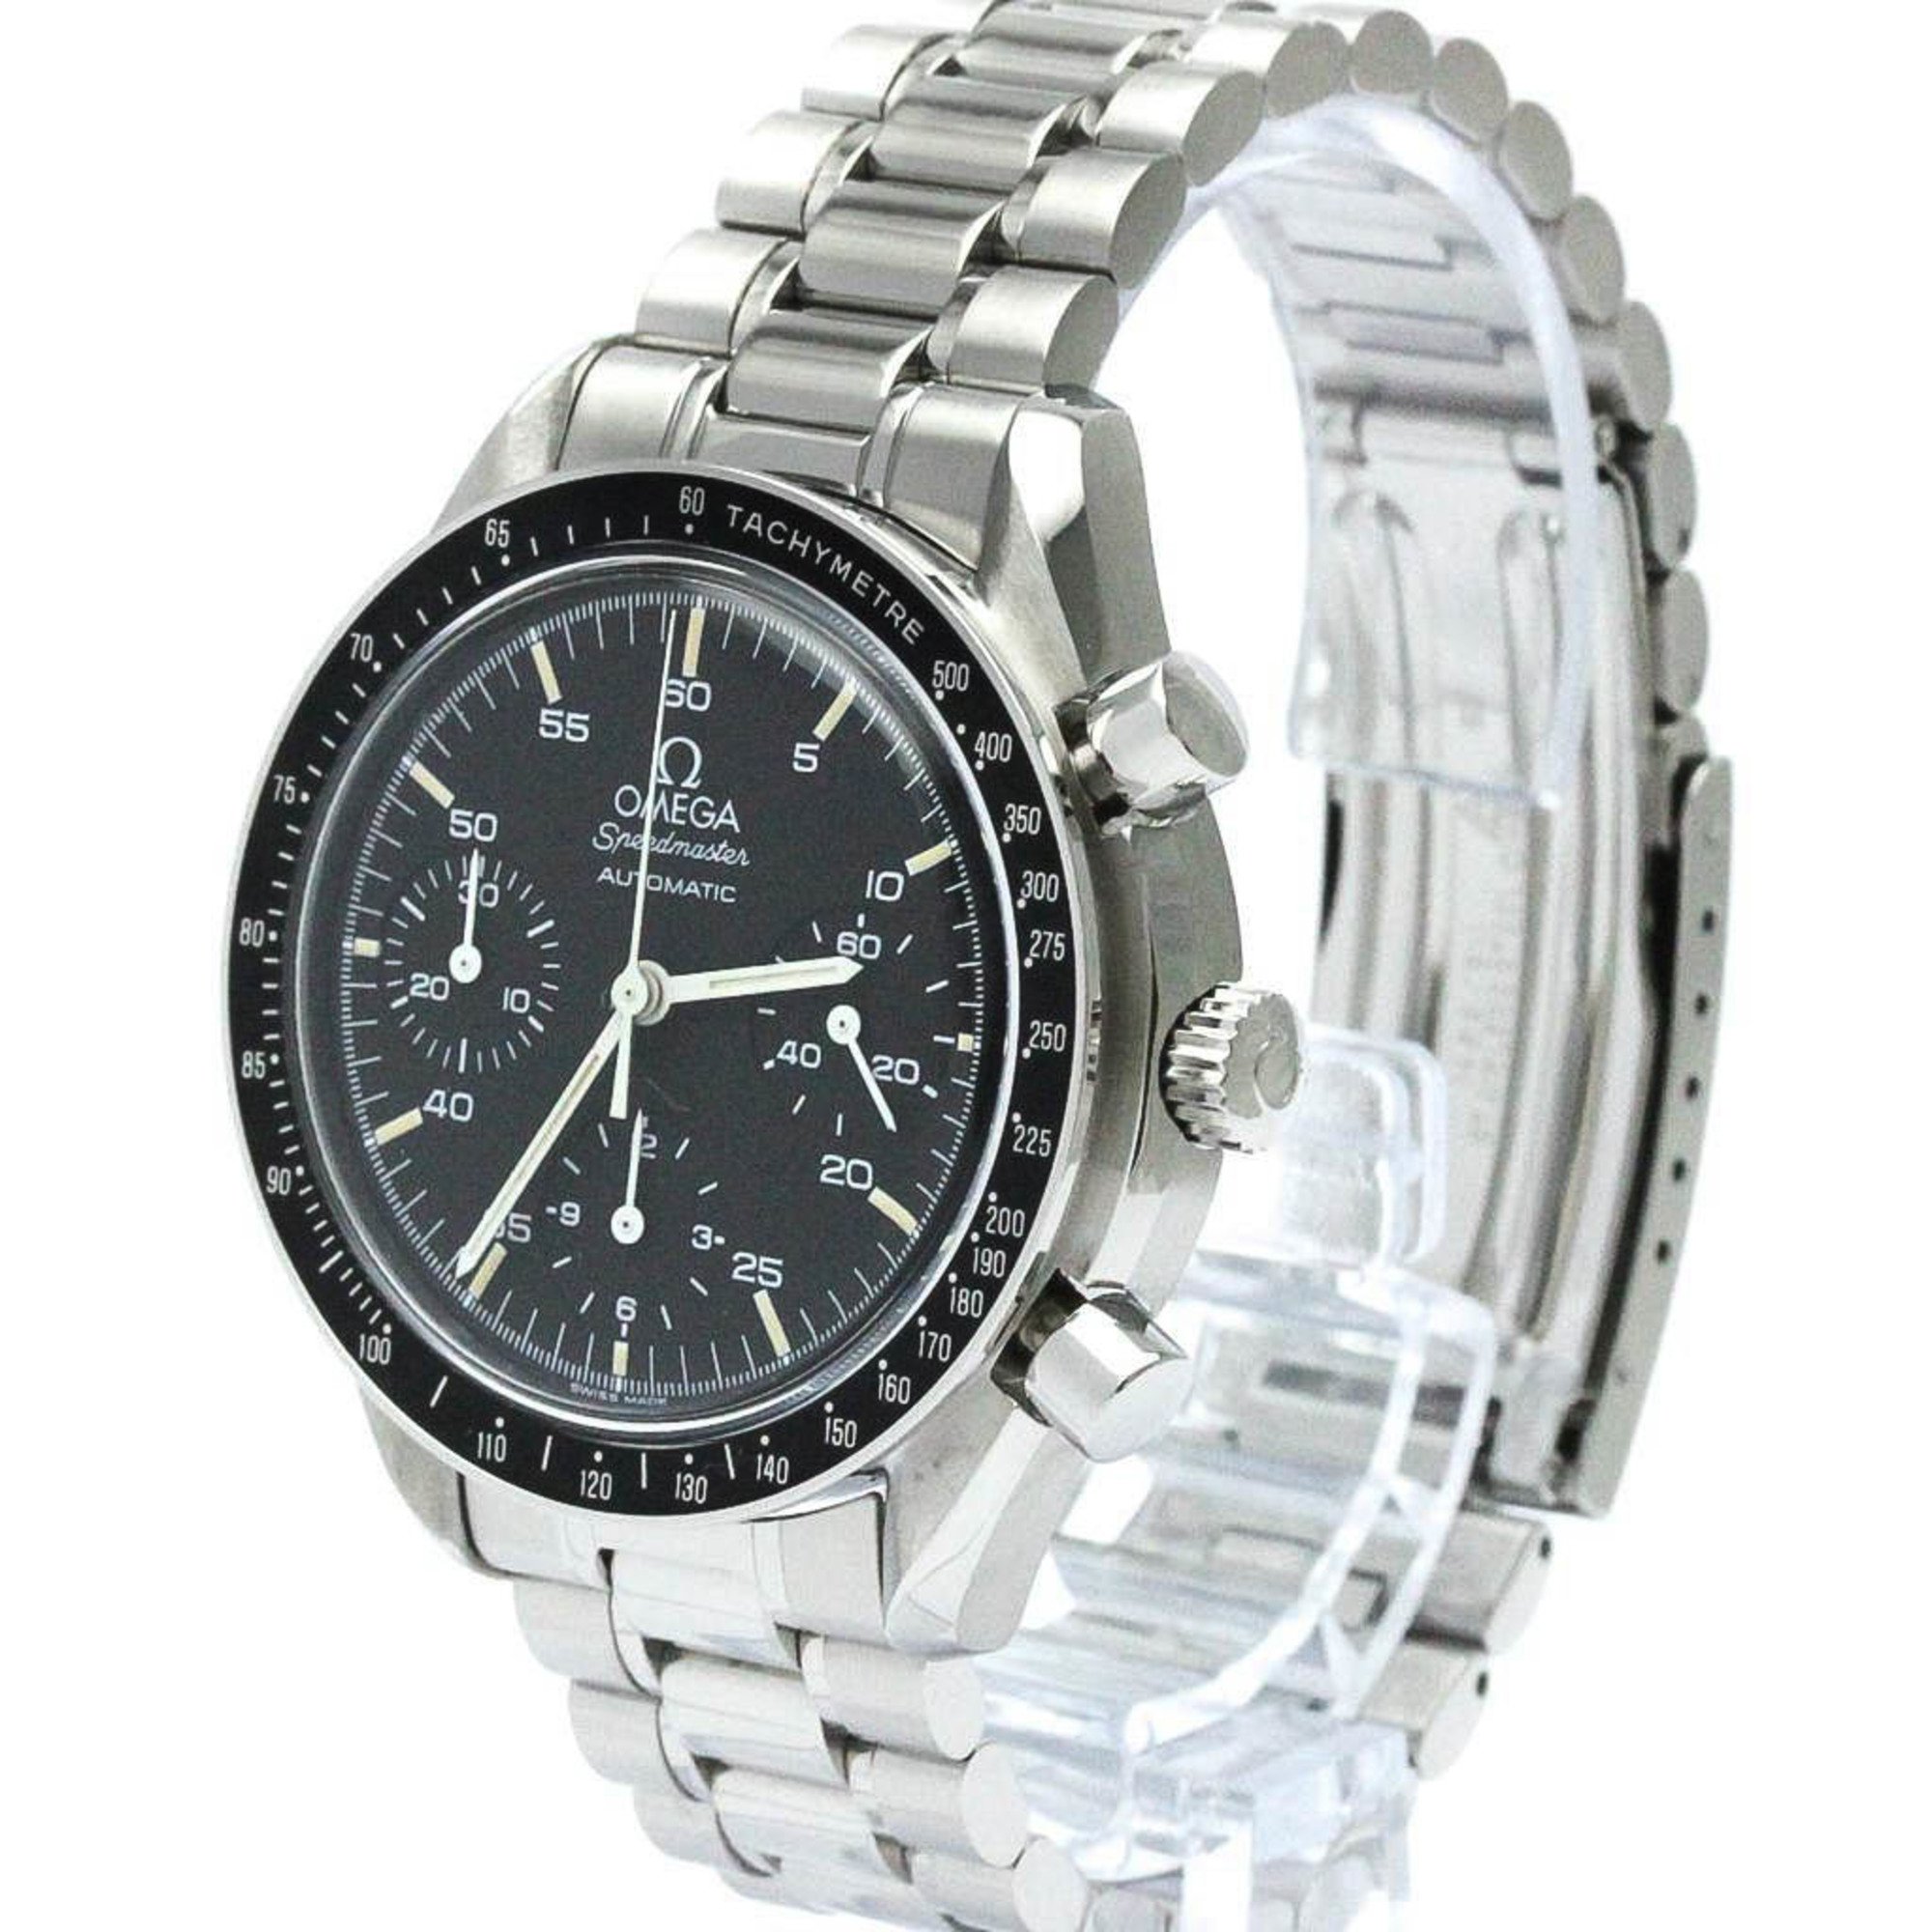 Polished OMEGA Speedmaster Automatic Steel Mens Watch 3510.50 BF566754